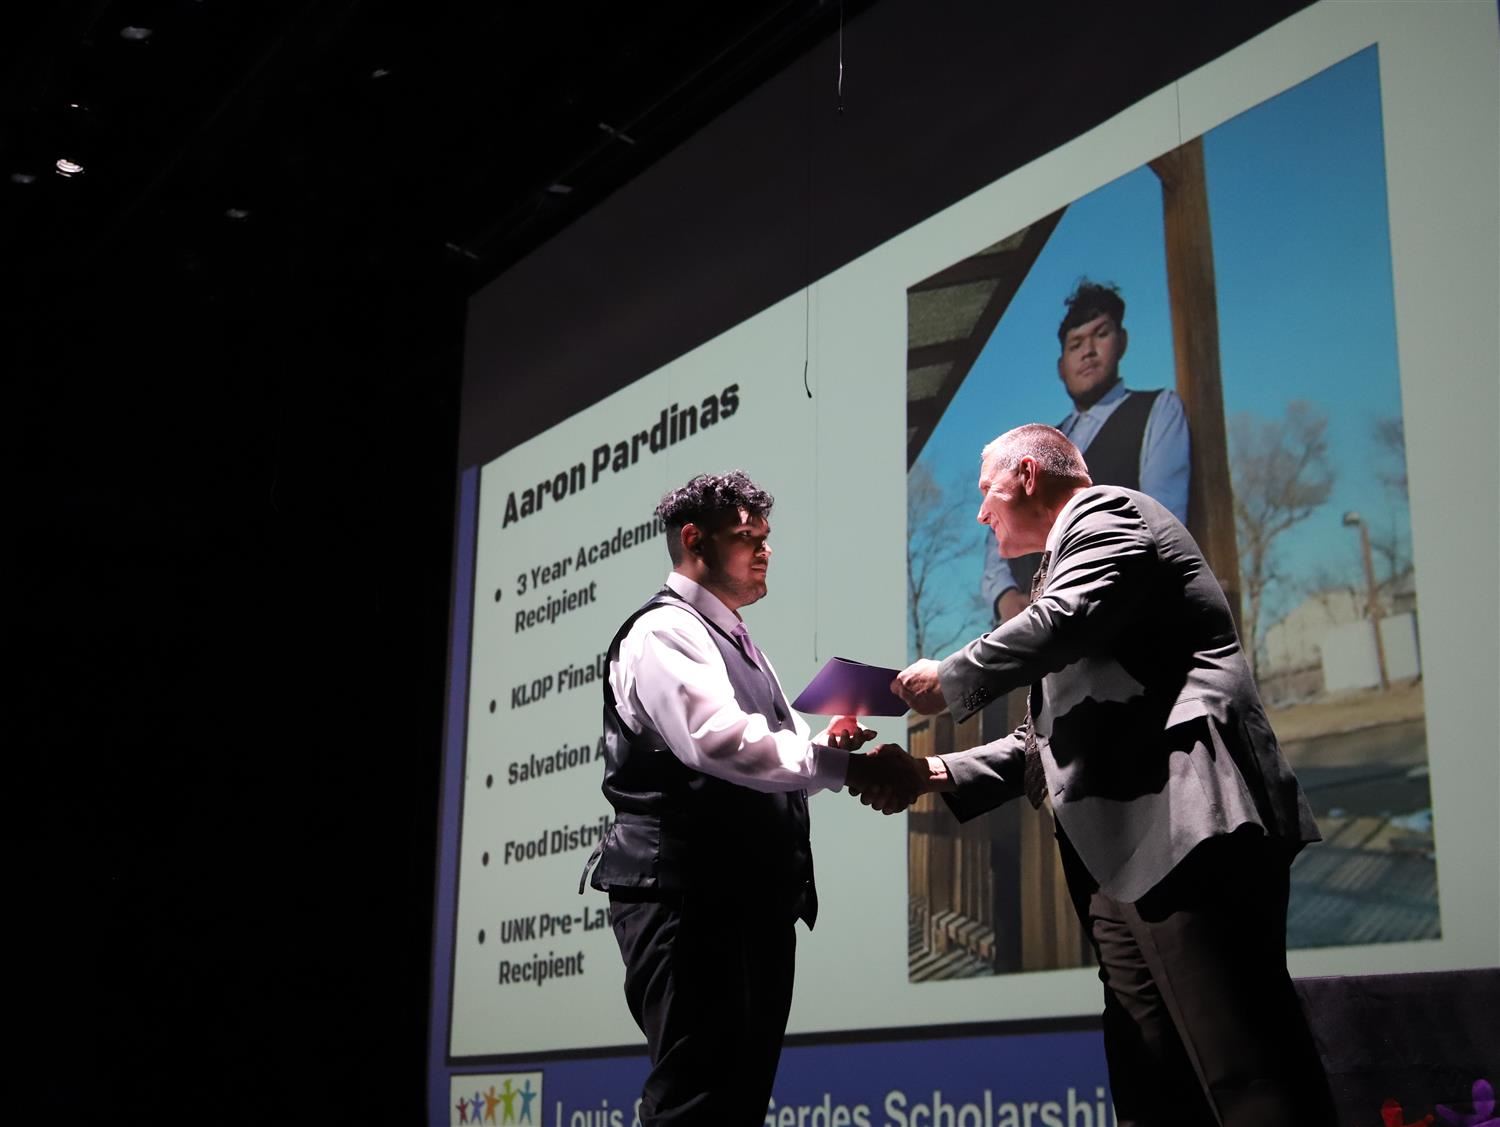 GIPS Superintendent, Mr. Fisher, shaking the hand of Aaron Pardinas on stage for Academic Honors Night.